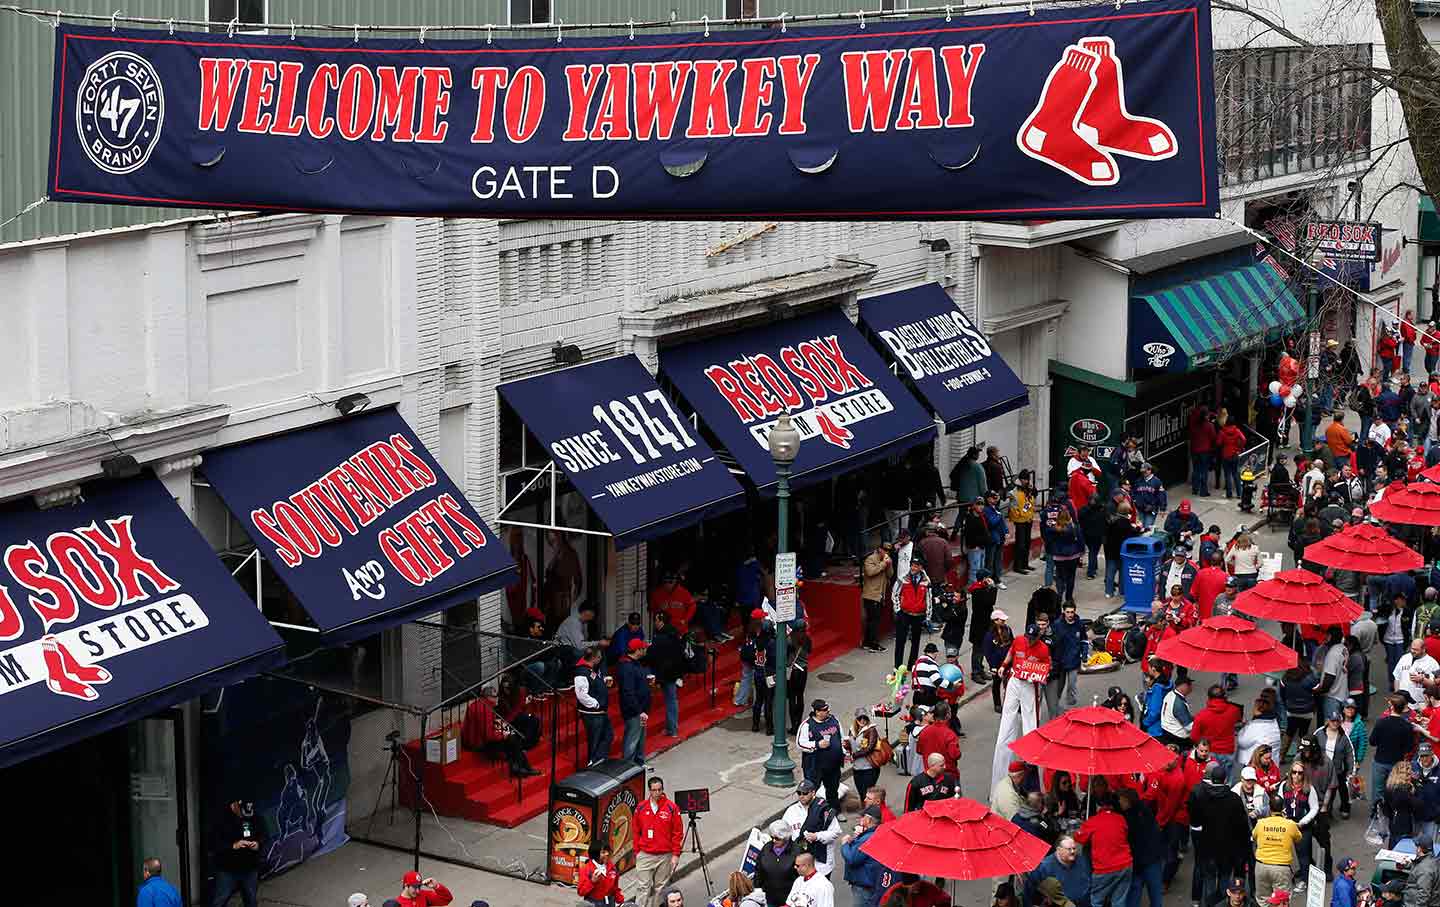 The Red Sox, the Confederacy, and Changing the Name of Yawkey Way